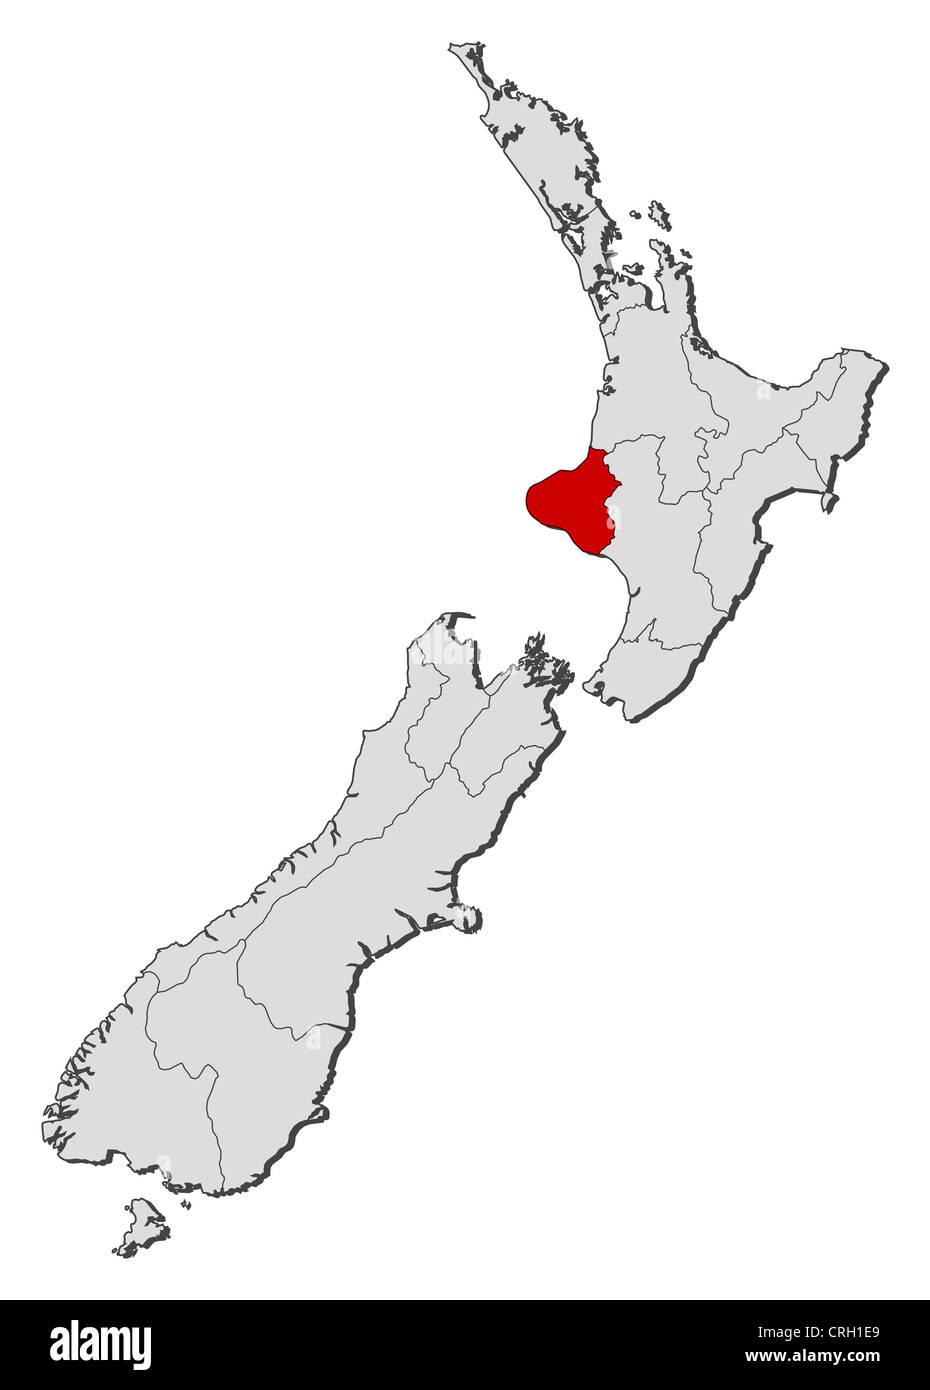 Political map of New Zealand with the several regions where Manawatu-Wanganui is highlighted. Stock Photo